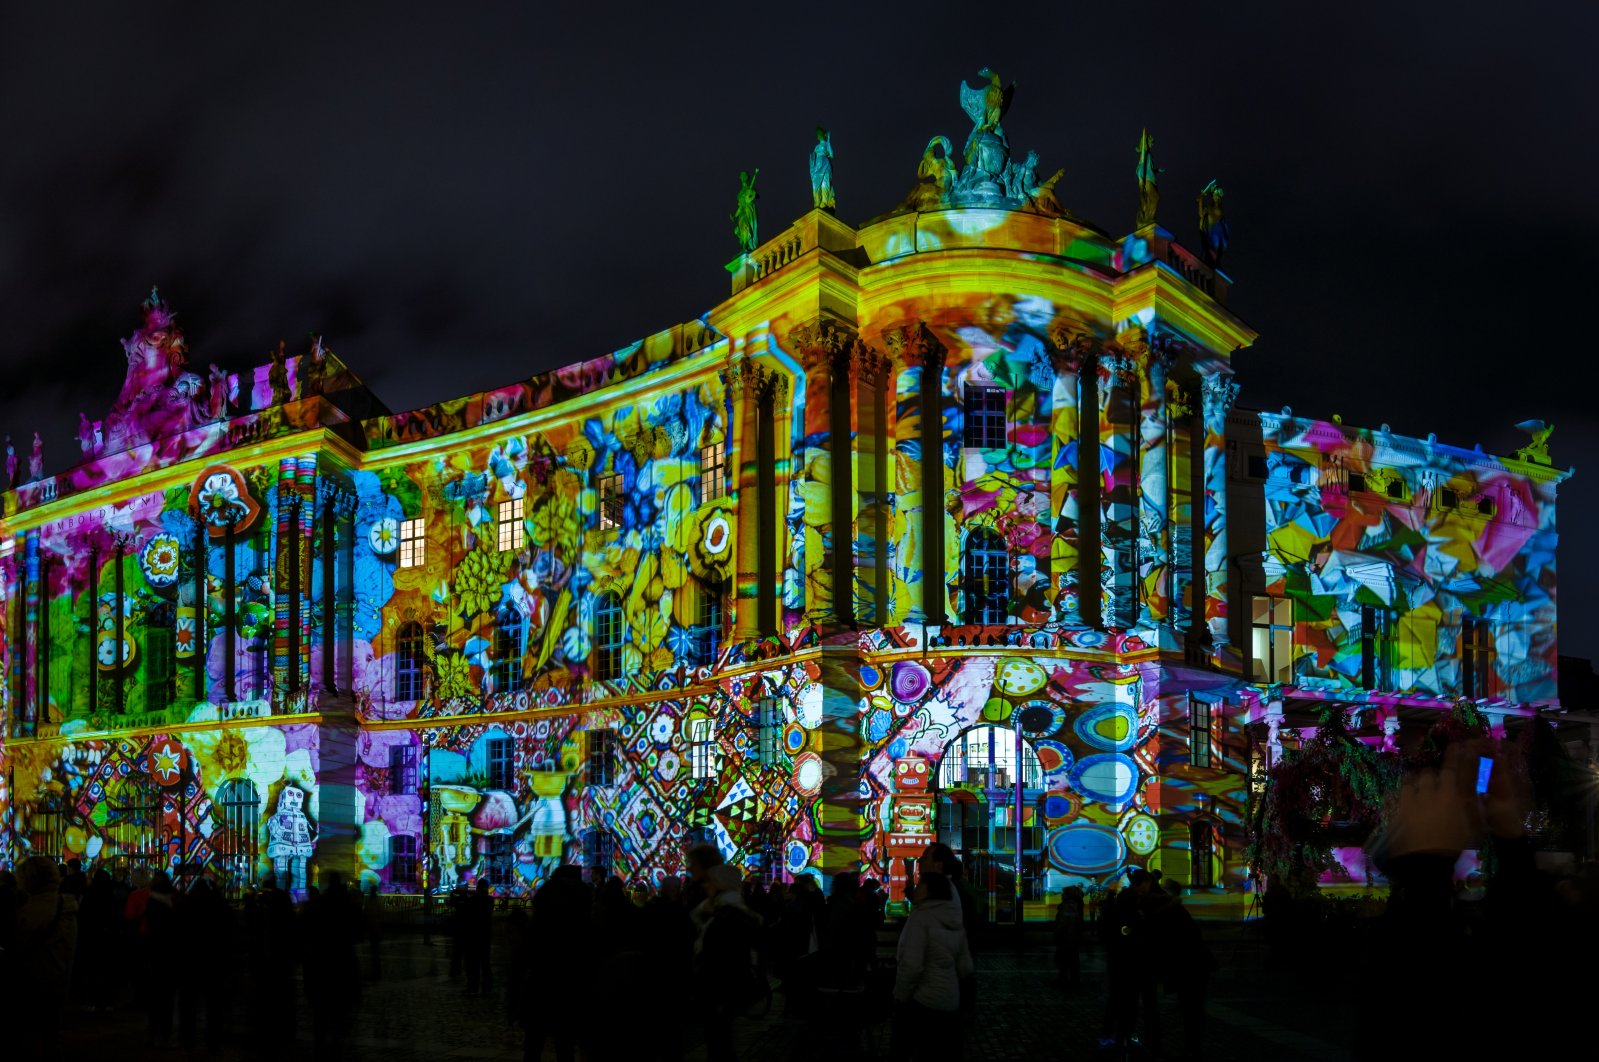 The building of the Law Faculty of the Humboldt University in festive illumination during the Festival of Lights, Berlin, Germany, Oct. 8, 2016. (Shutterstock) 